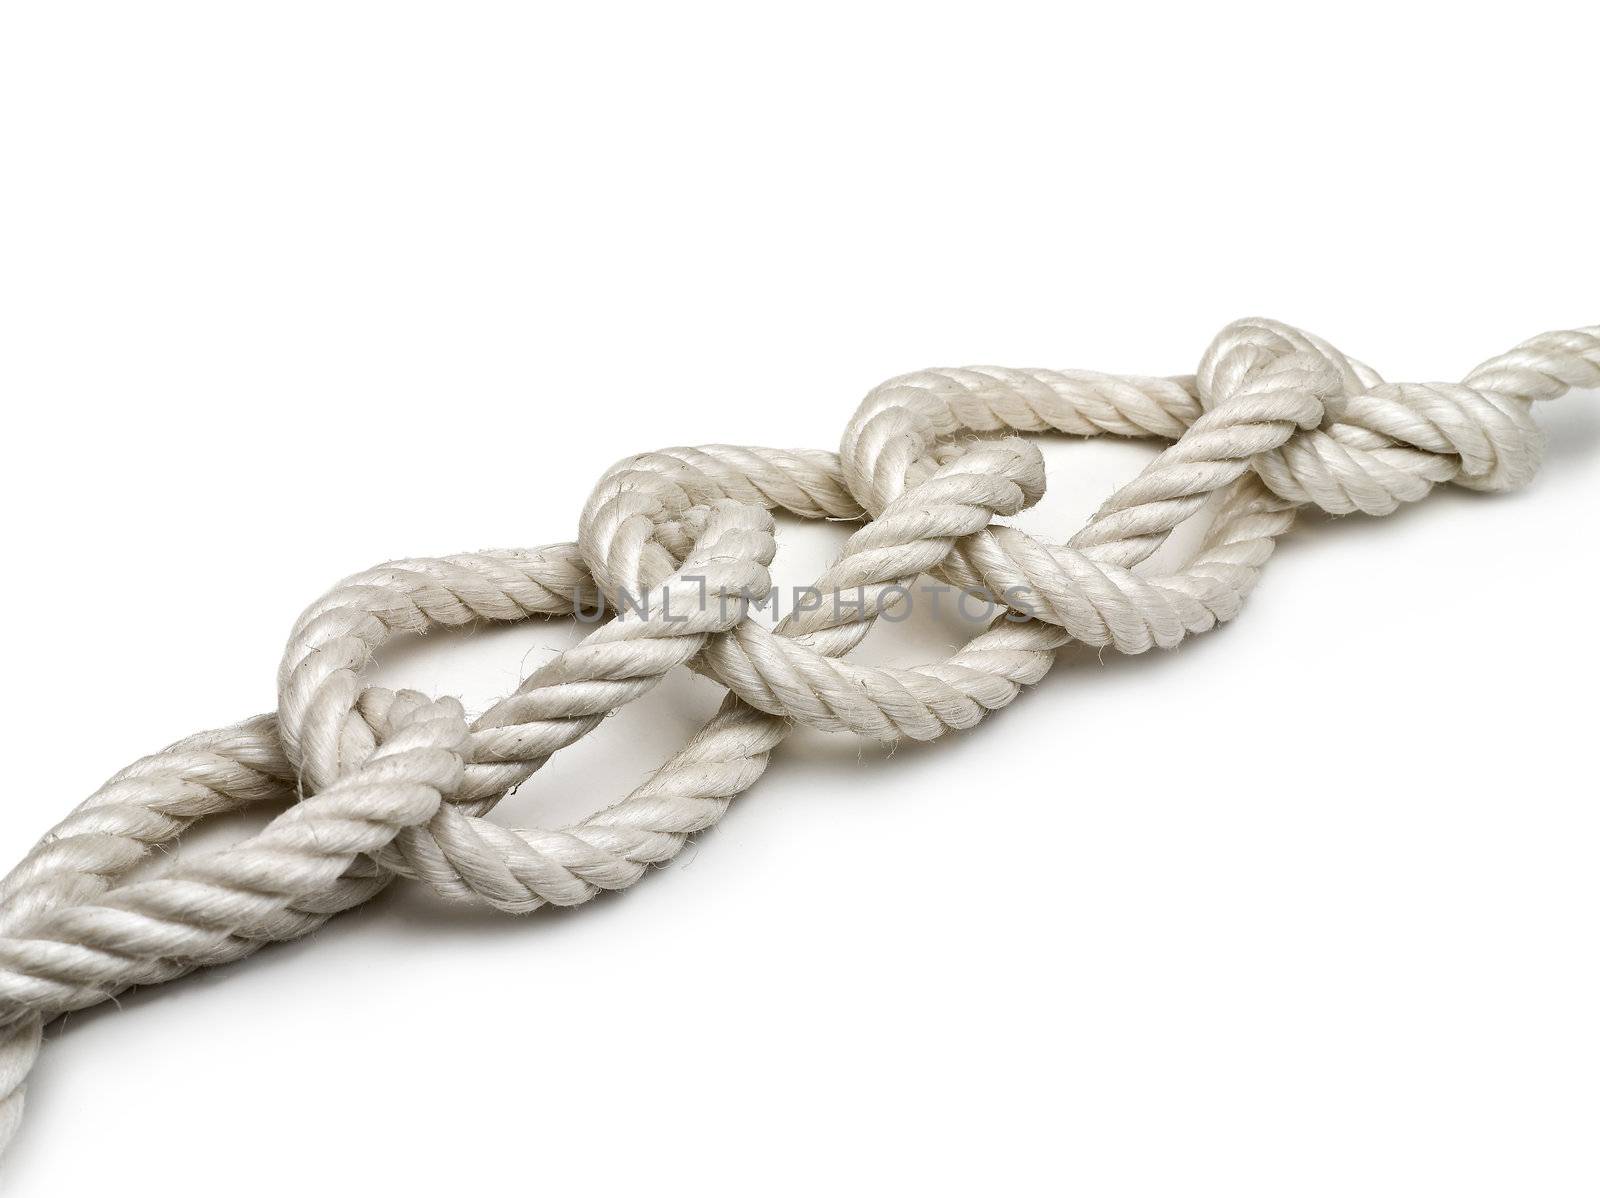 The knot in a rope. on white background